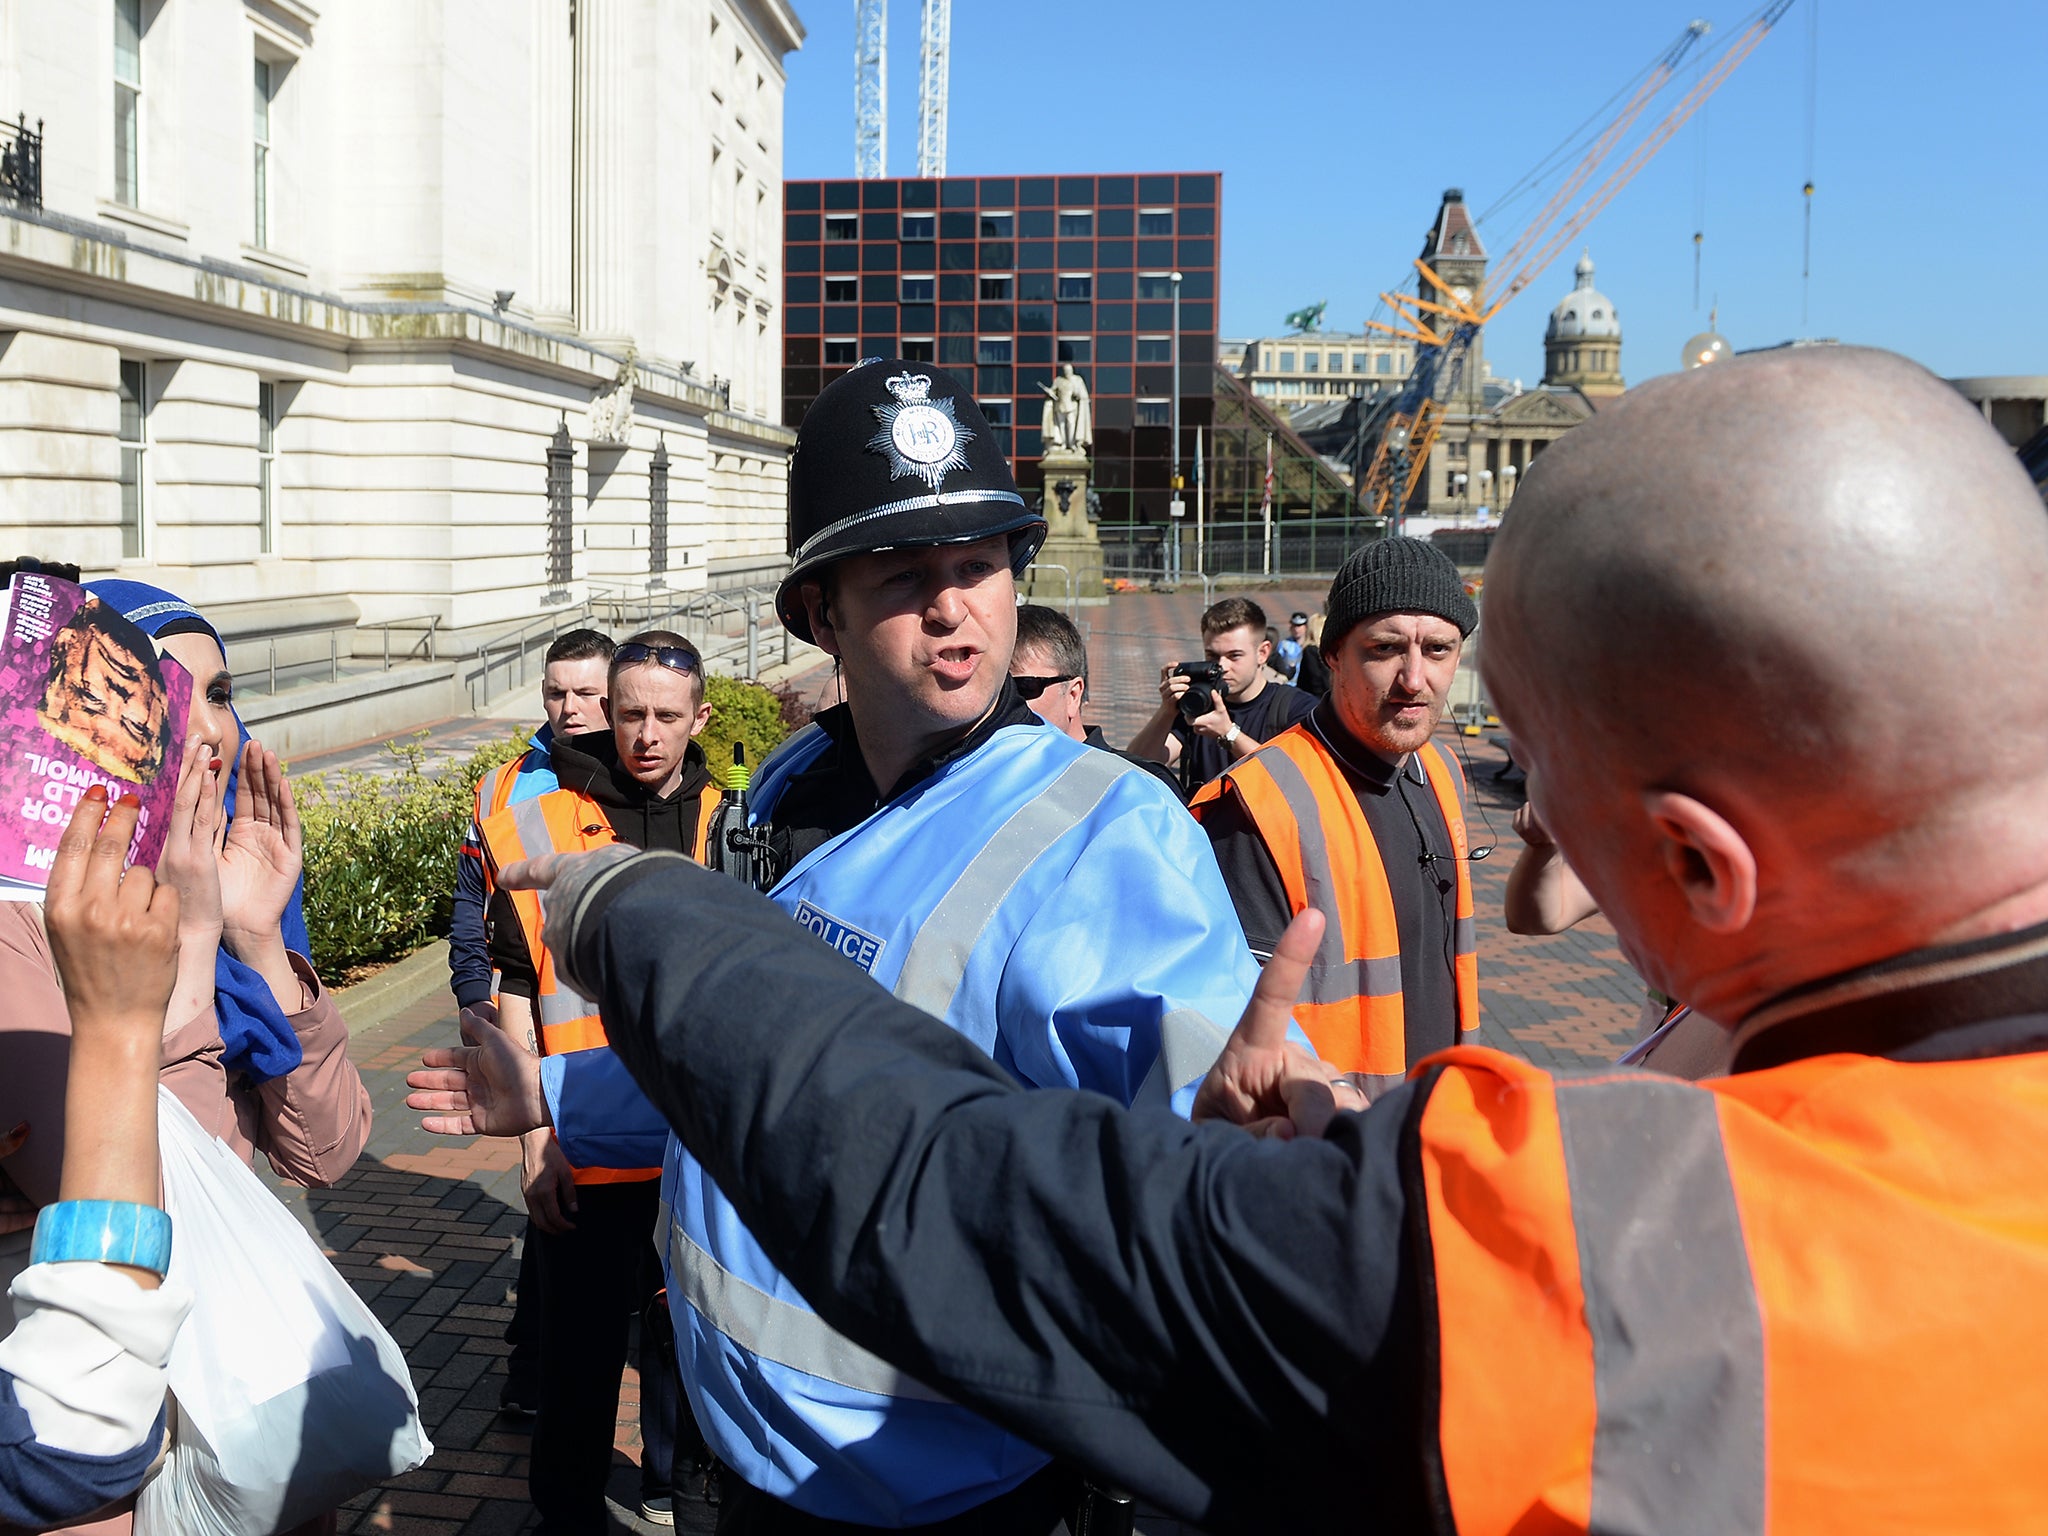 EDL demonstrators remonstrate with anti-fascist protester in Birmingham